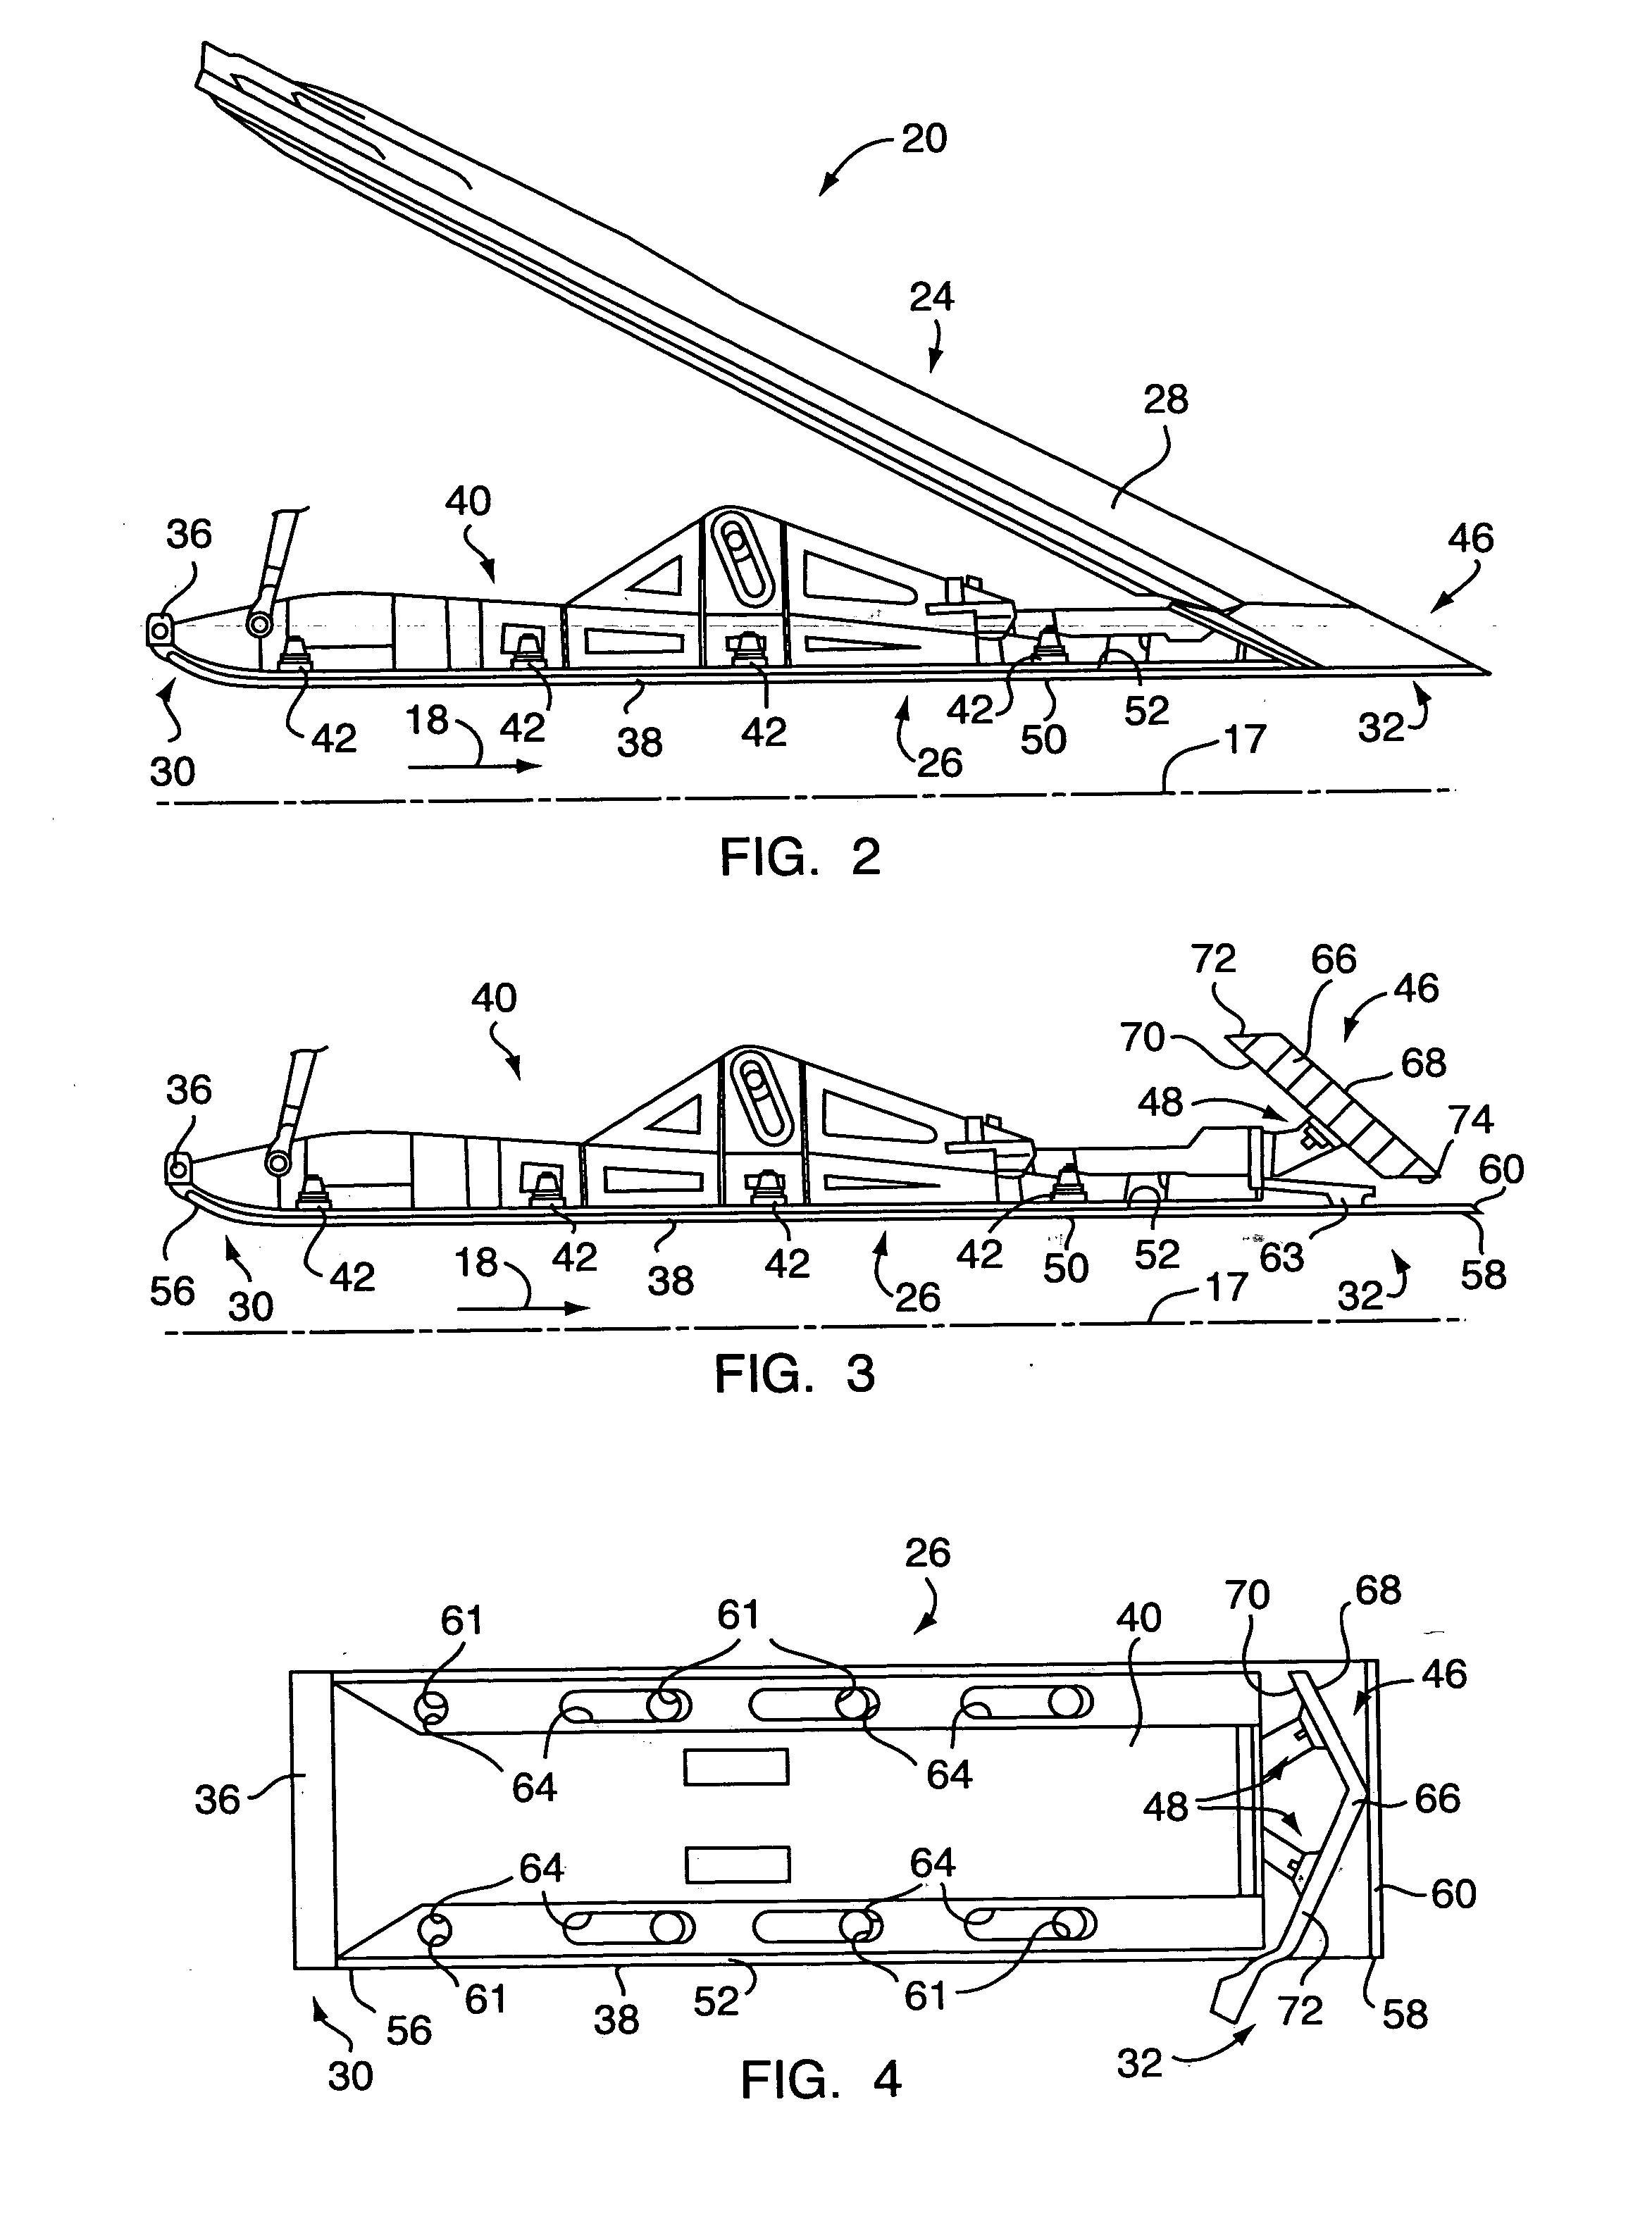 Divergent flap for a gas turbine engine